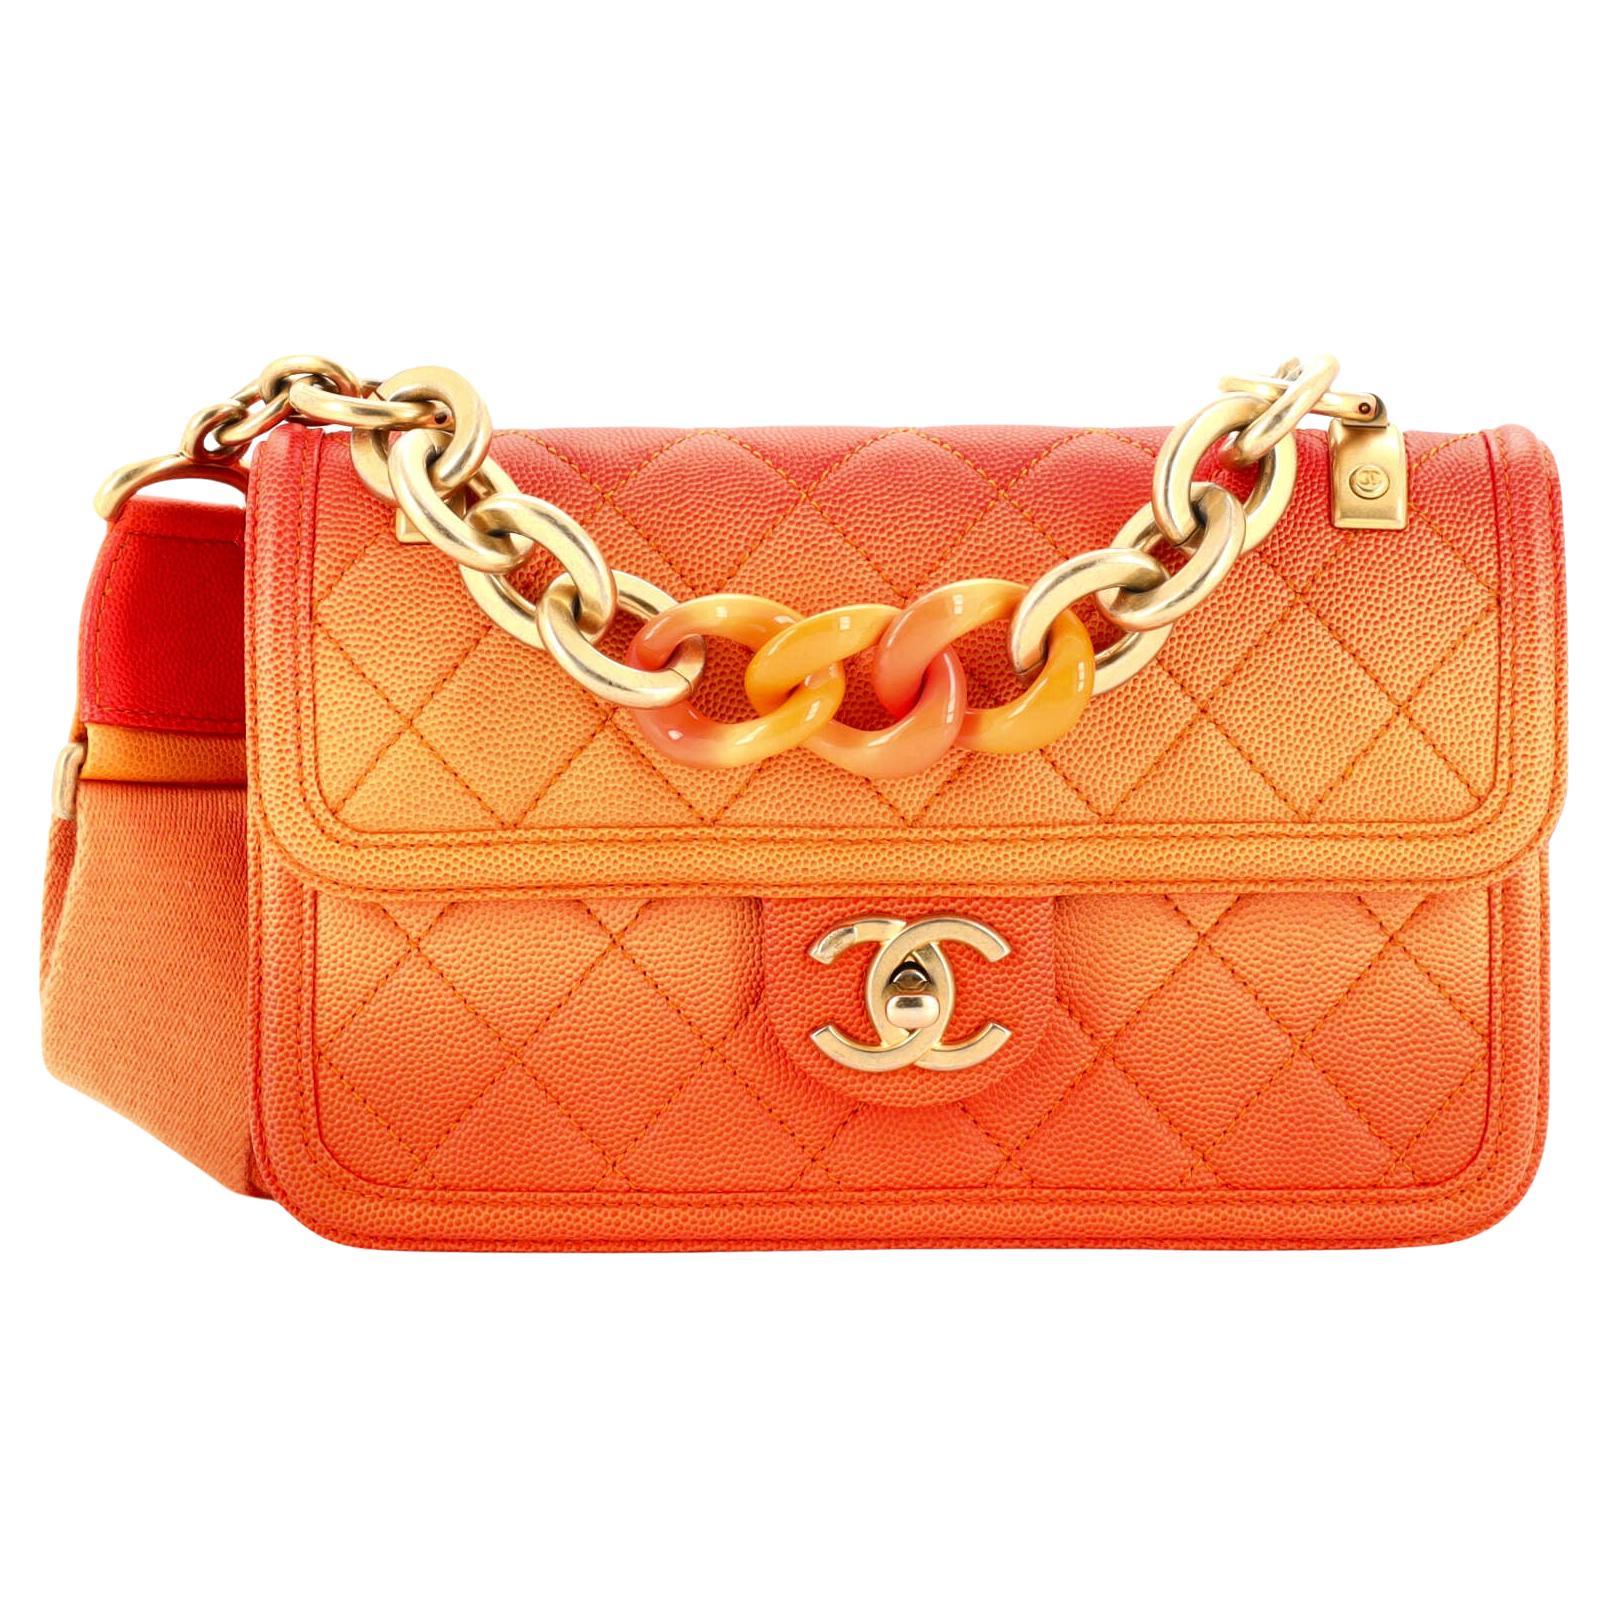 CHANEL Caviar Quilted Small Sunset On The Sea Flap Coral 322421